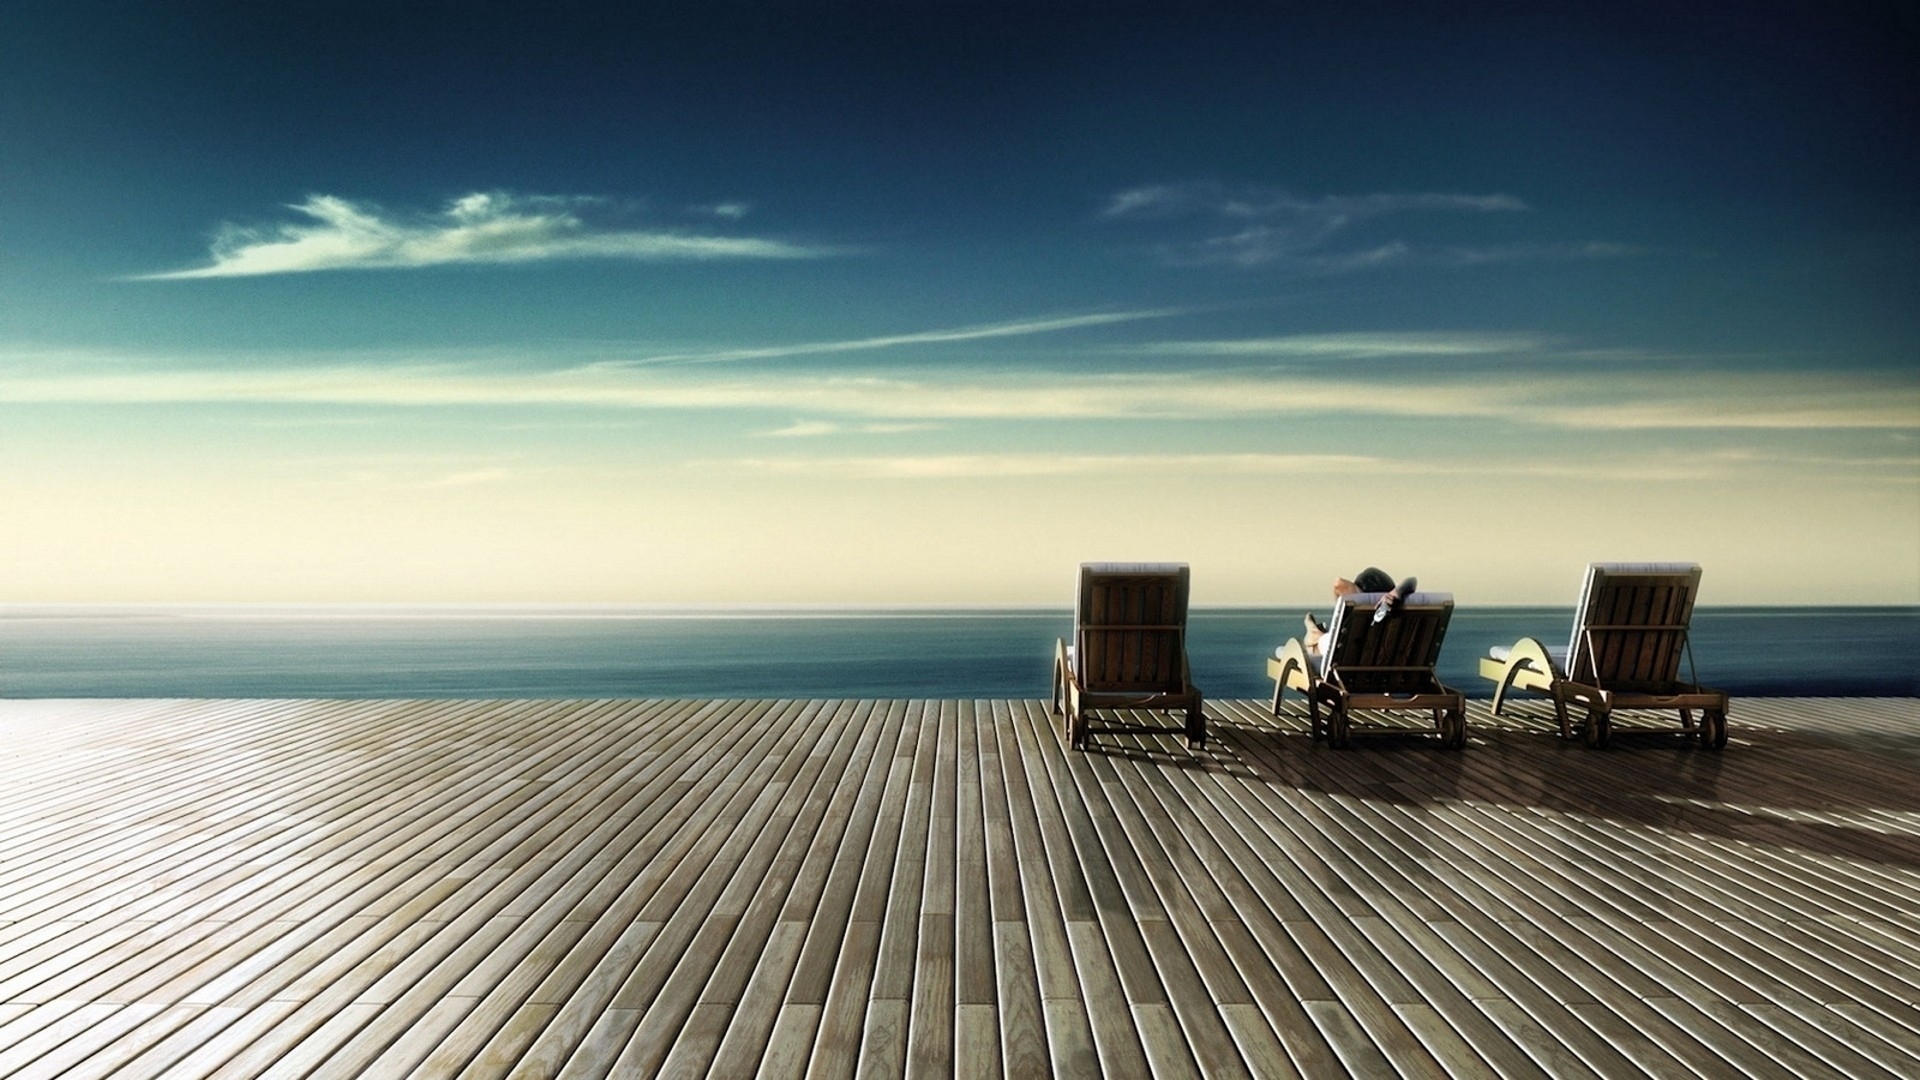 relax wallpapers | hd wallpapers | id #10950